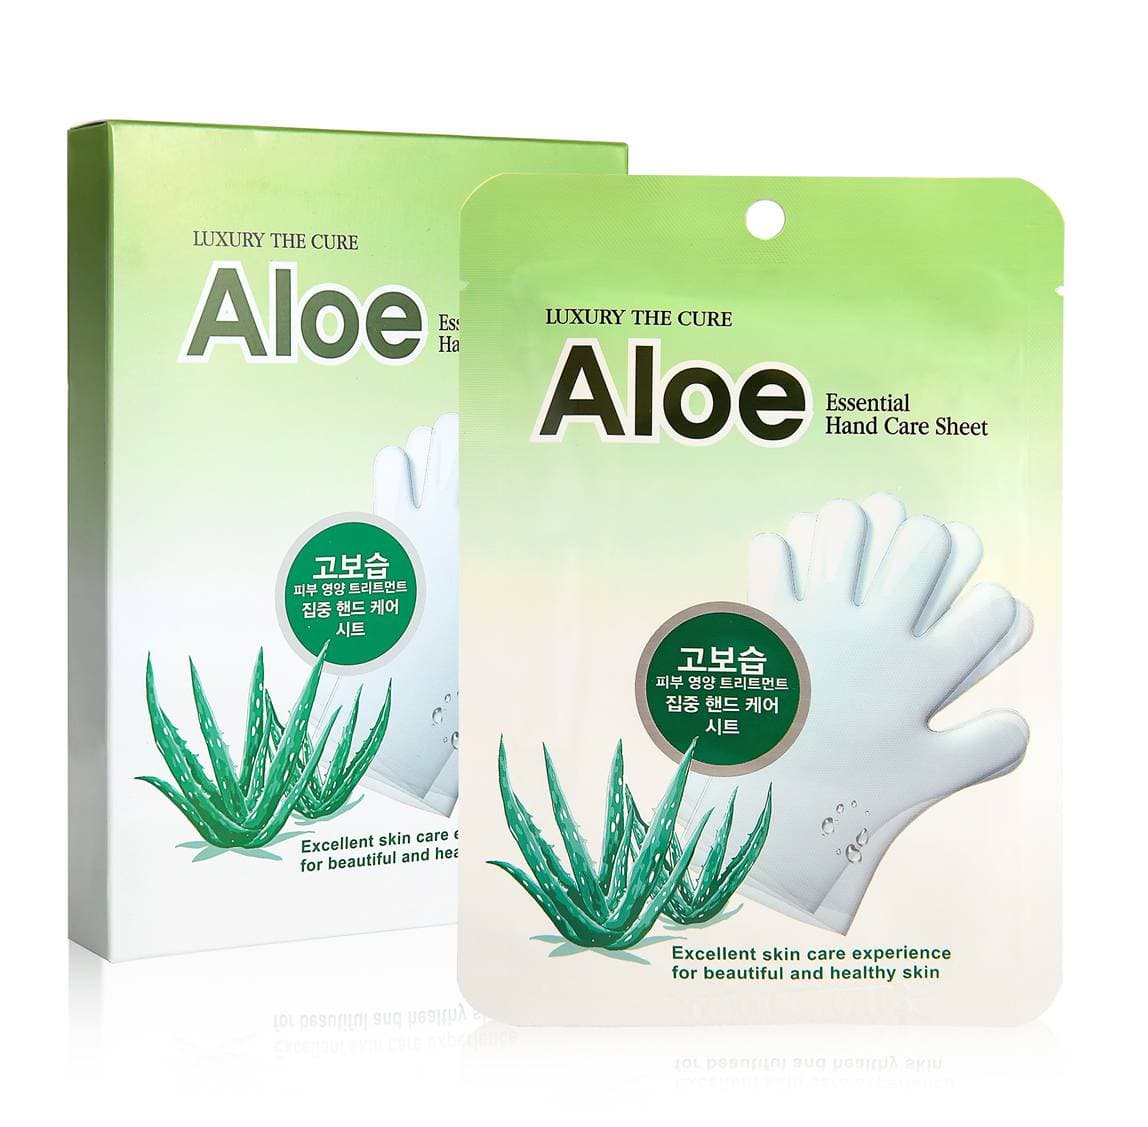 Luxury The Cure Aloe Essential Hand Care Sheet